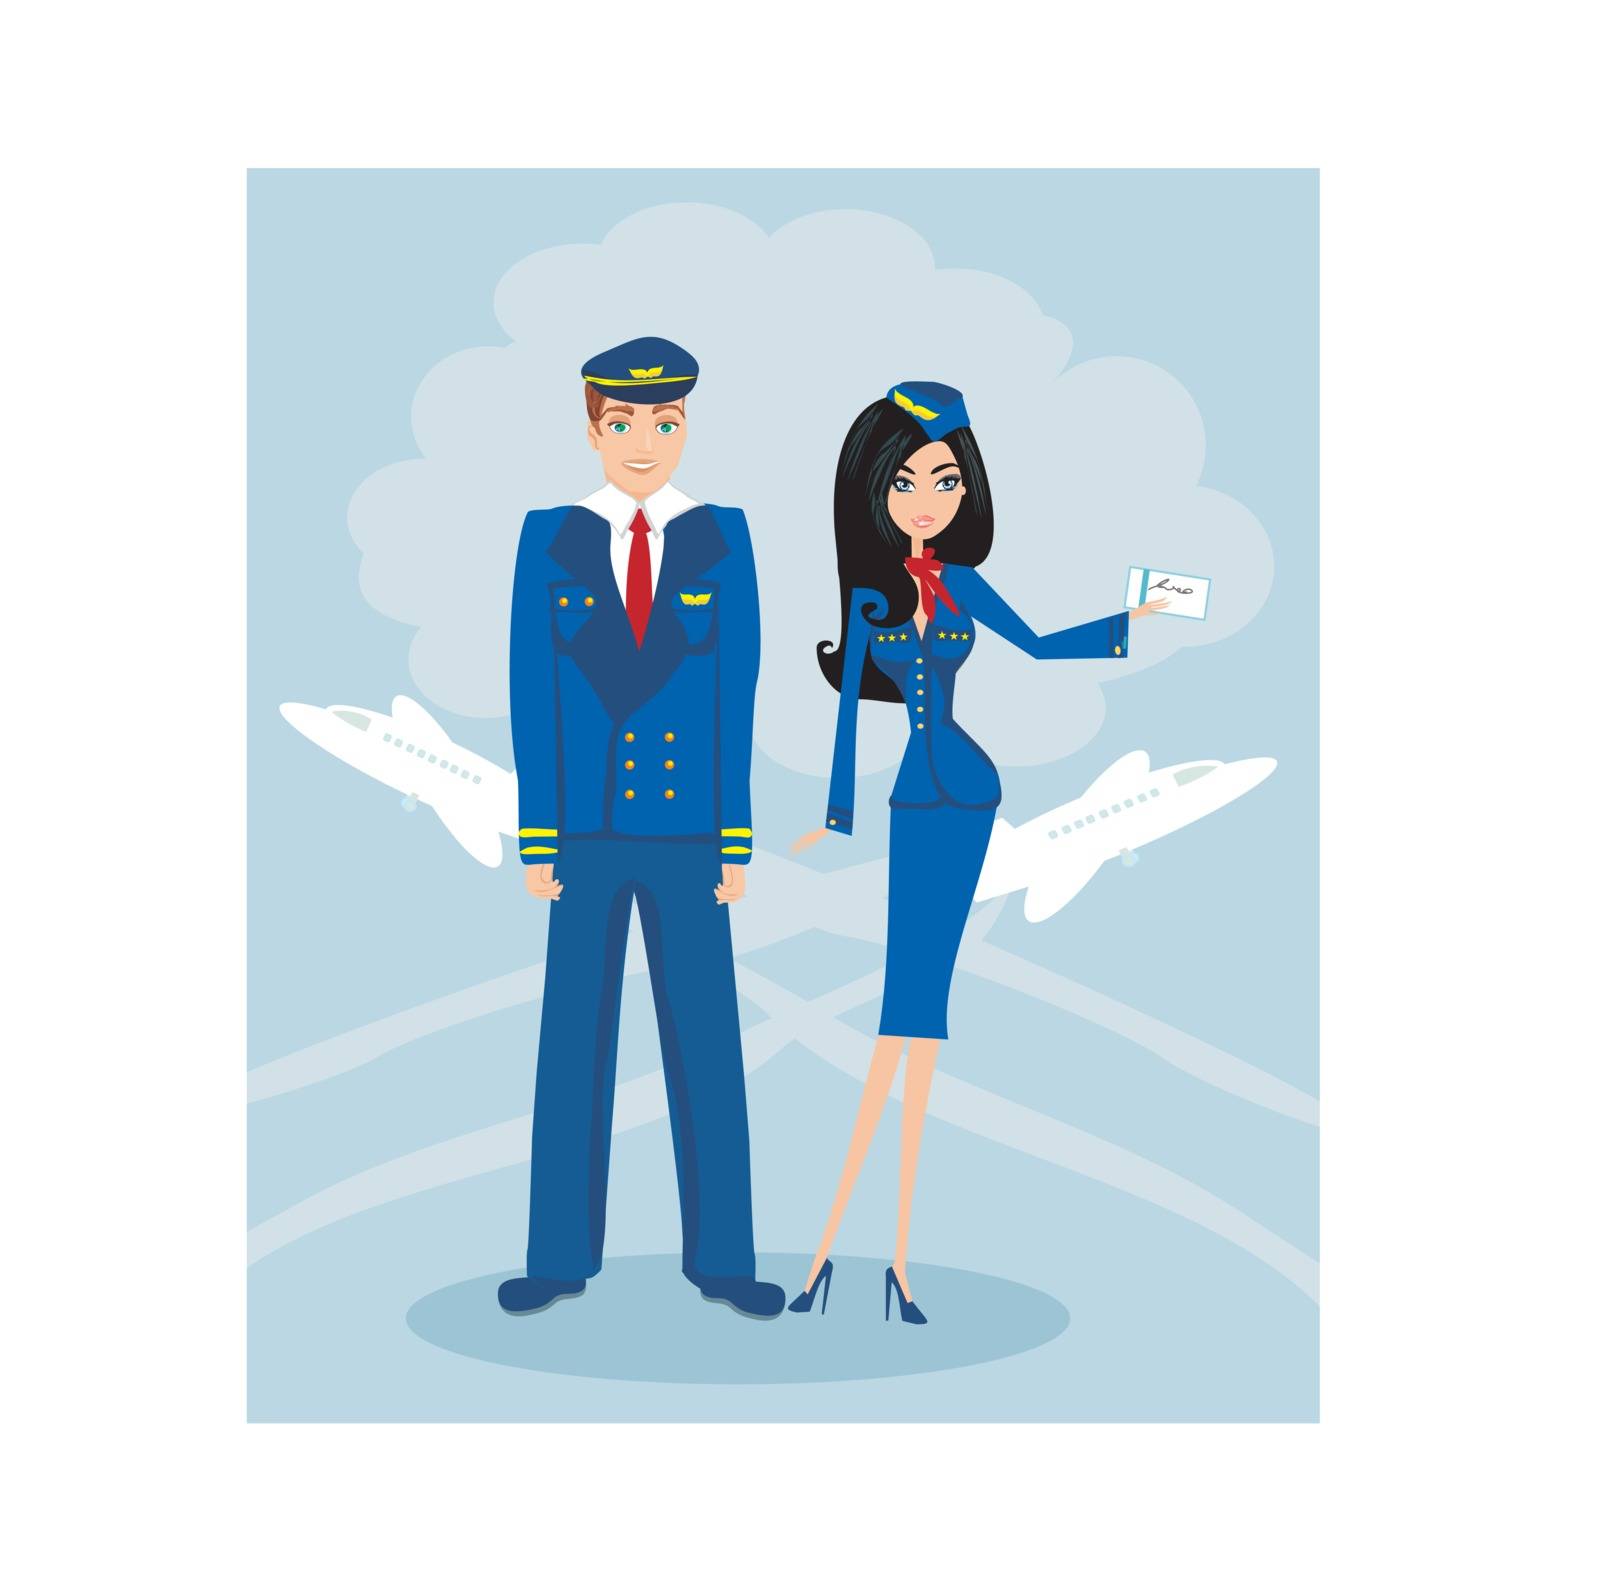 A pilot and stewardess in uniform by JackyBrown